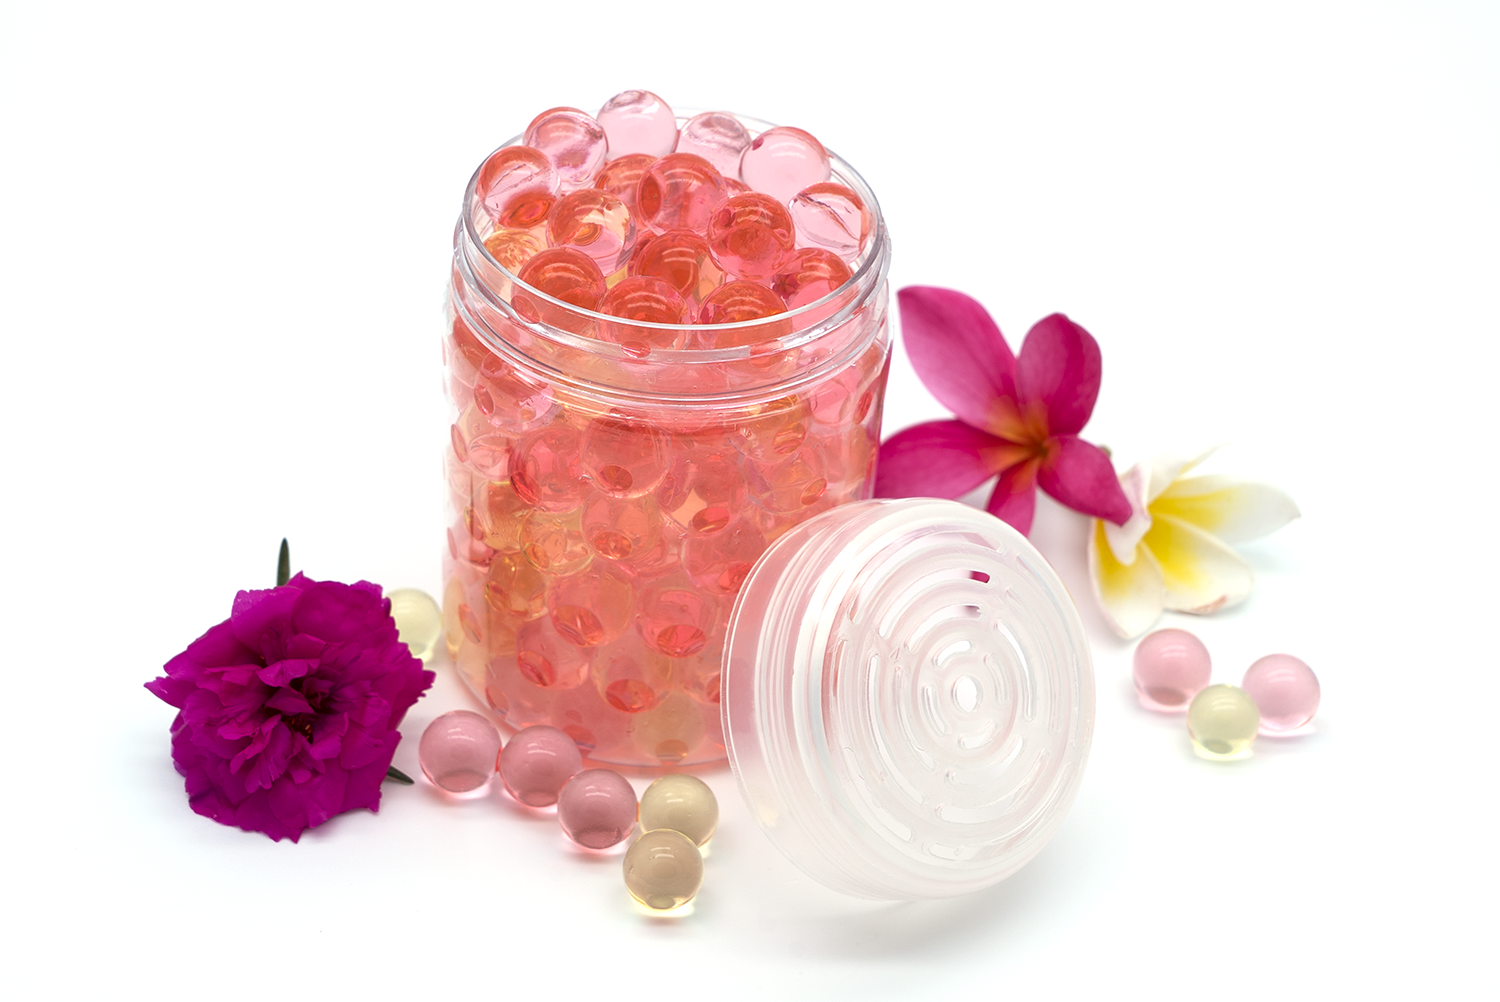 Demi environmental fragrance beads to ensure the best possible food for indoor